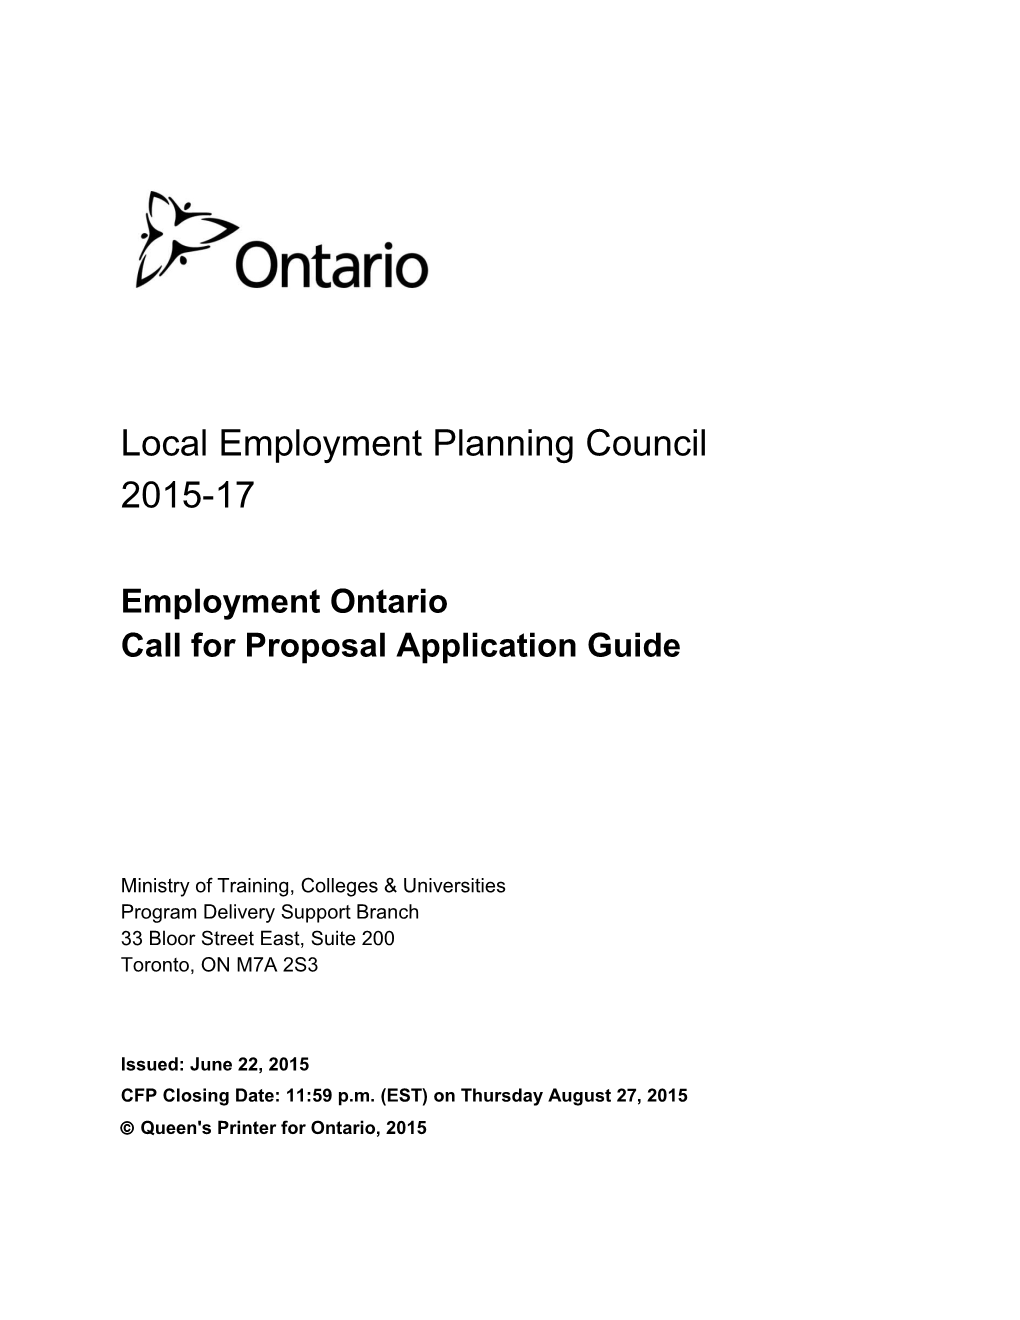 Call for Proposal Application Guide